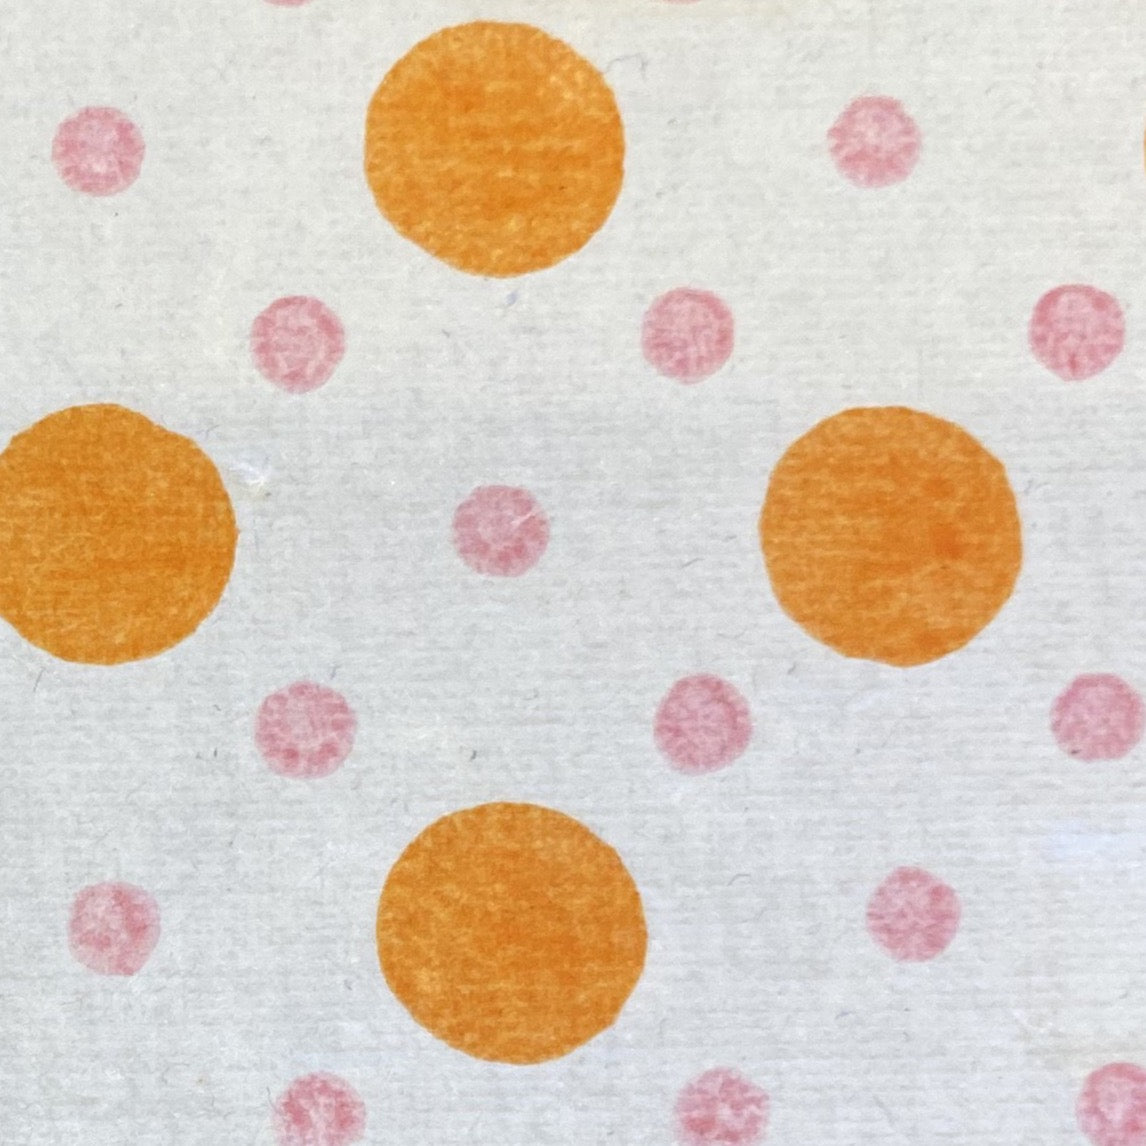 Notebooks Dots - Large